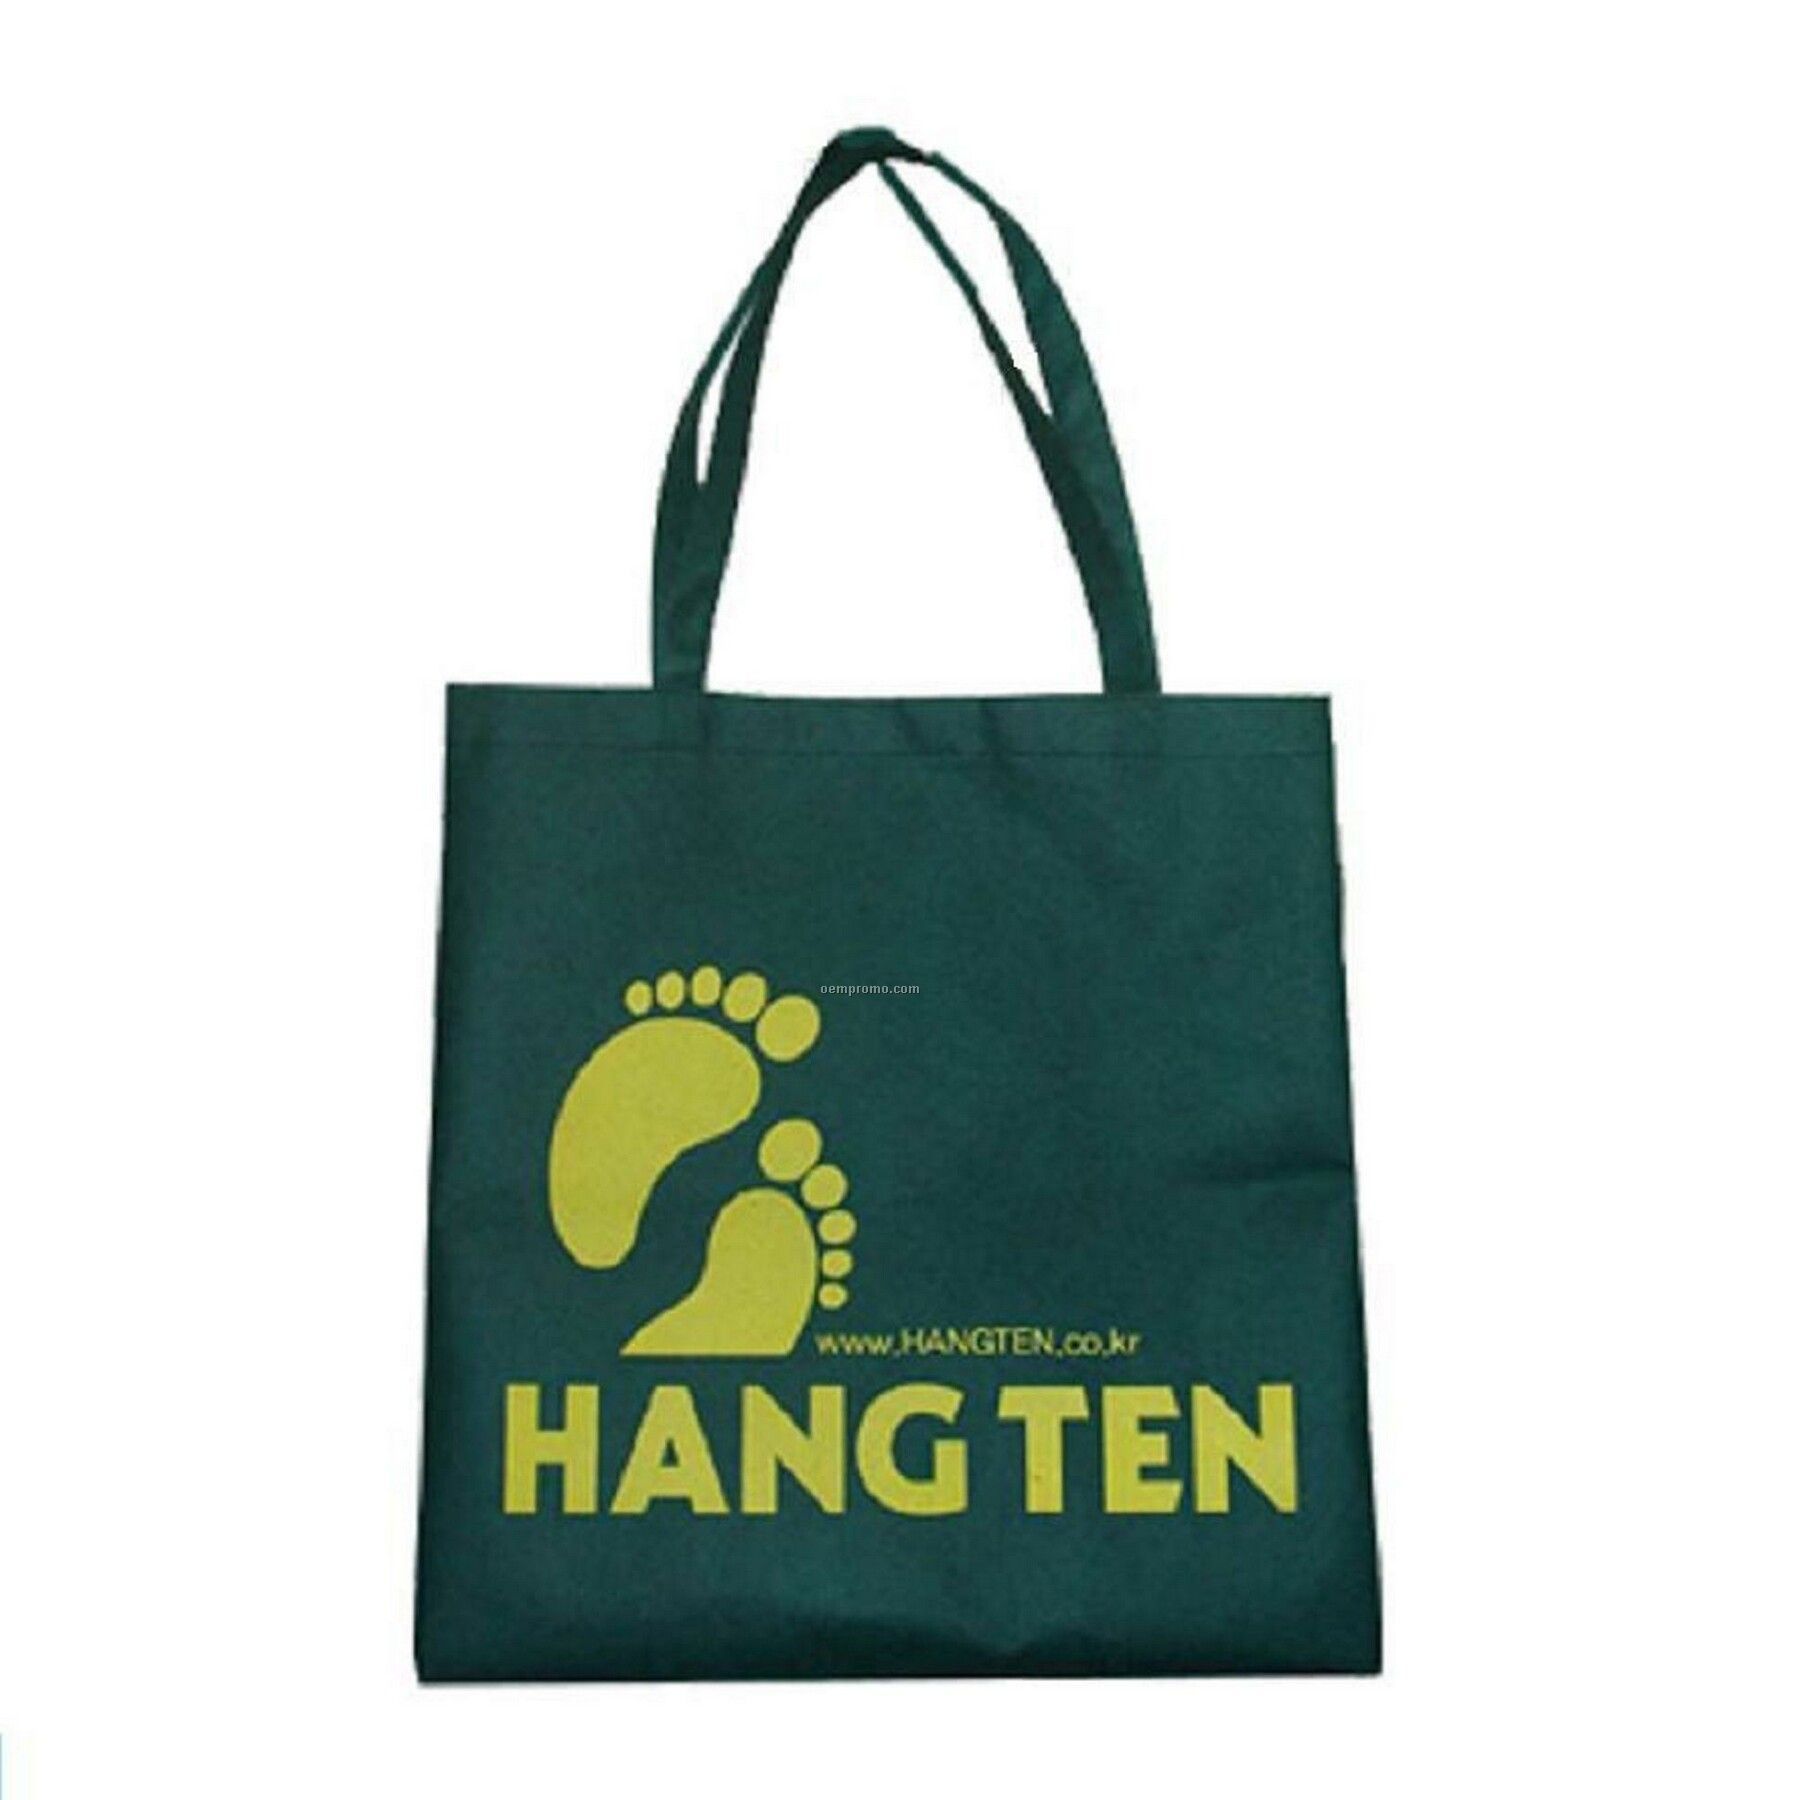 High Quality Non Woven Tote Bag. 80 Gsm Fabric, Measures 15"W X 16"H X 4"D